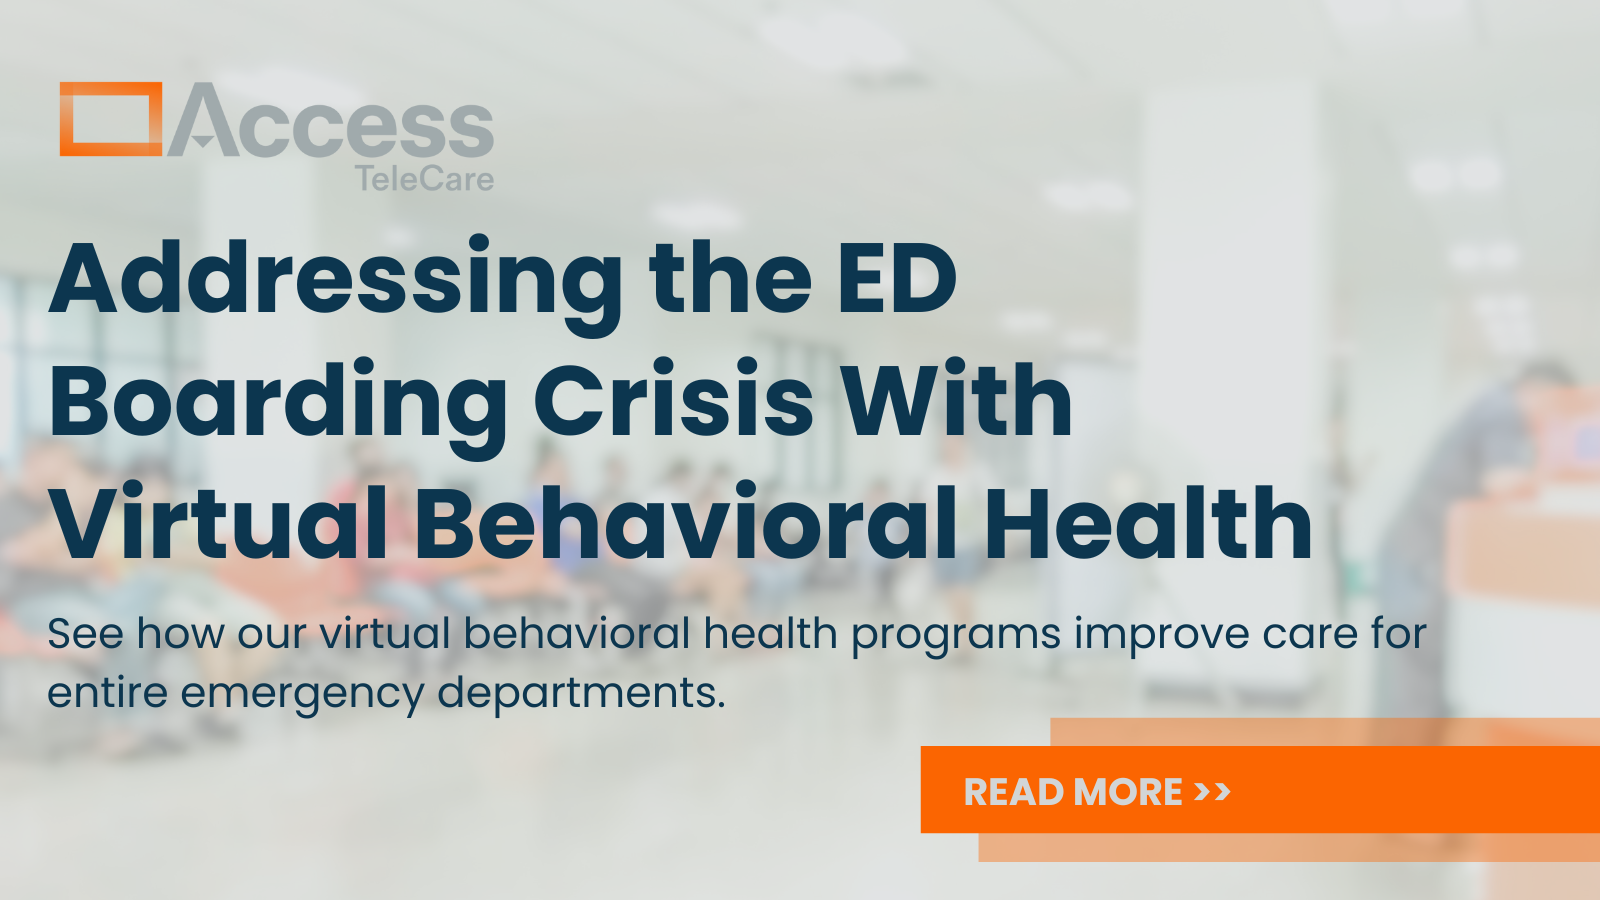 Access TeleCare telepsychiatry helps address the ED Boarding crisis with timely access to psychiatrists